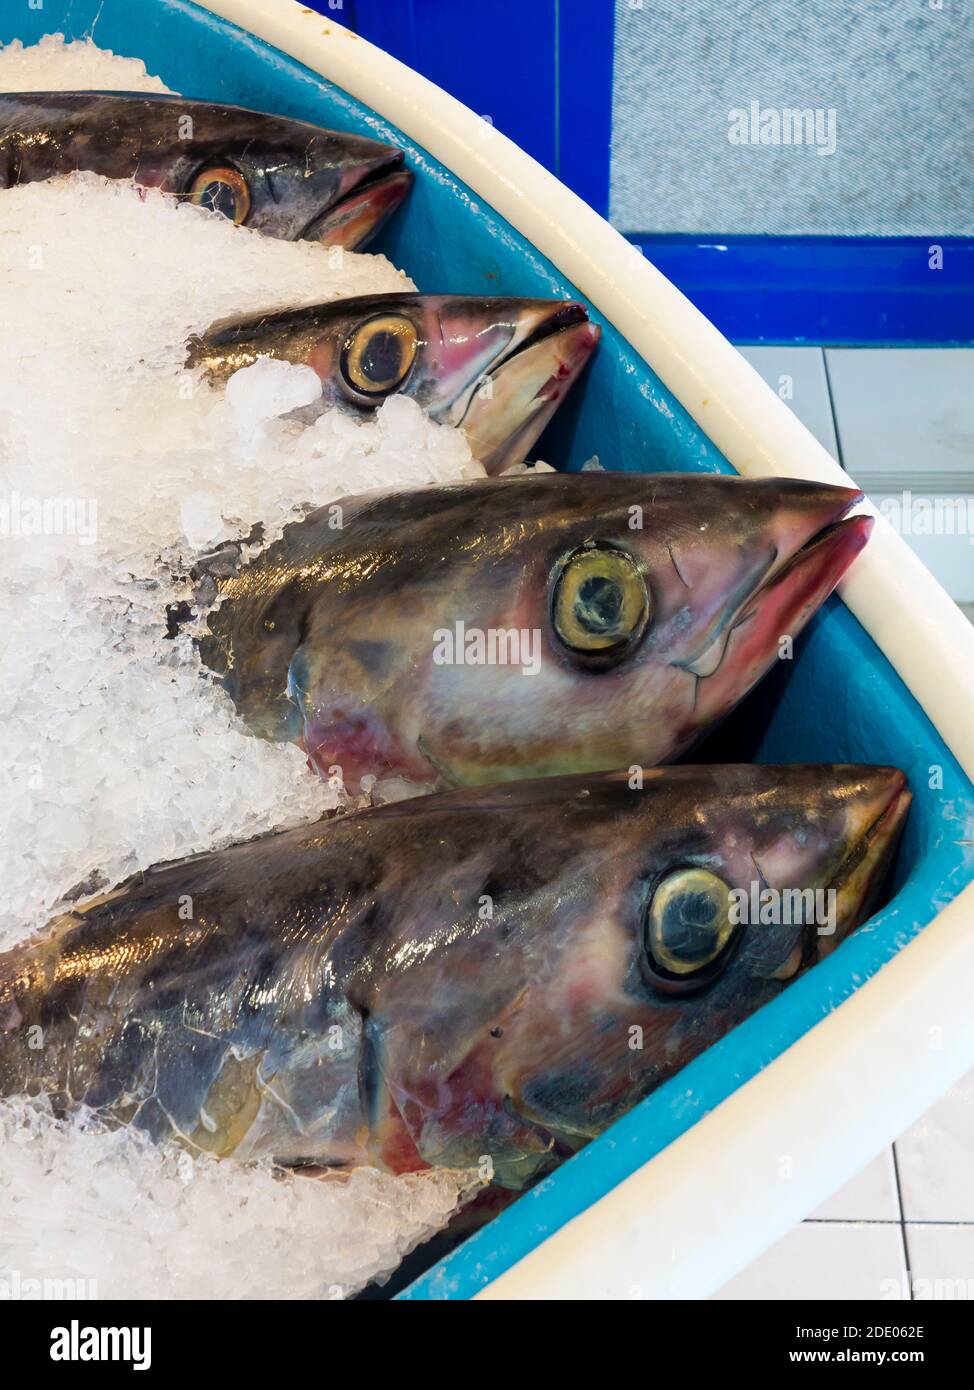 Freshly caught tuna fish packed in ice for sale in a fish market. Stock Photo